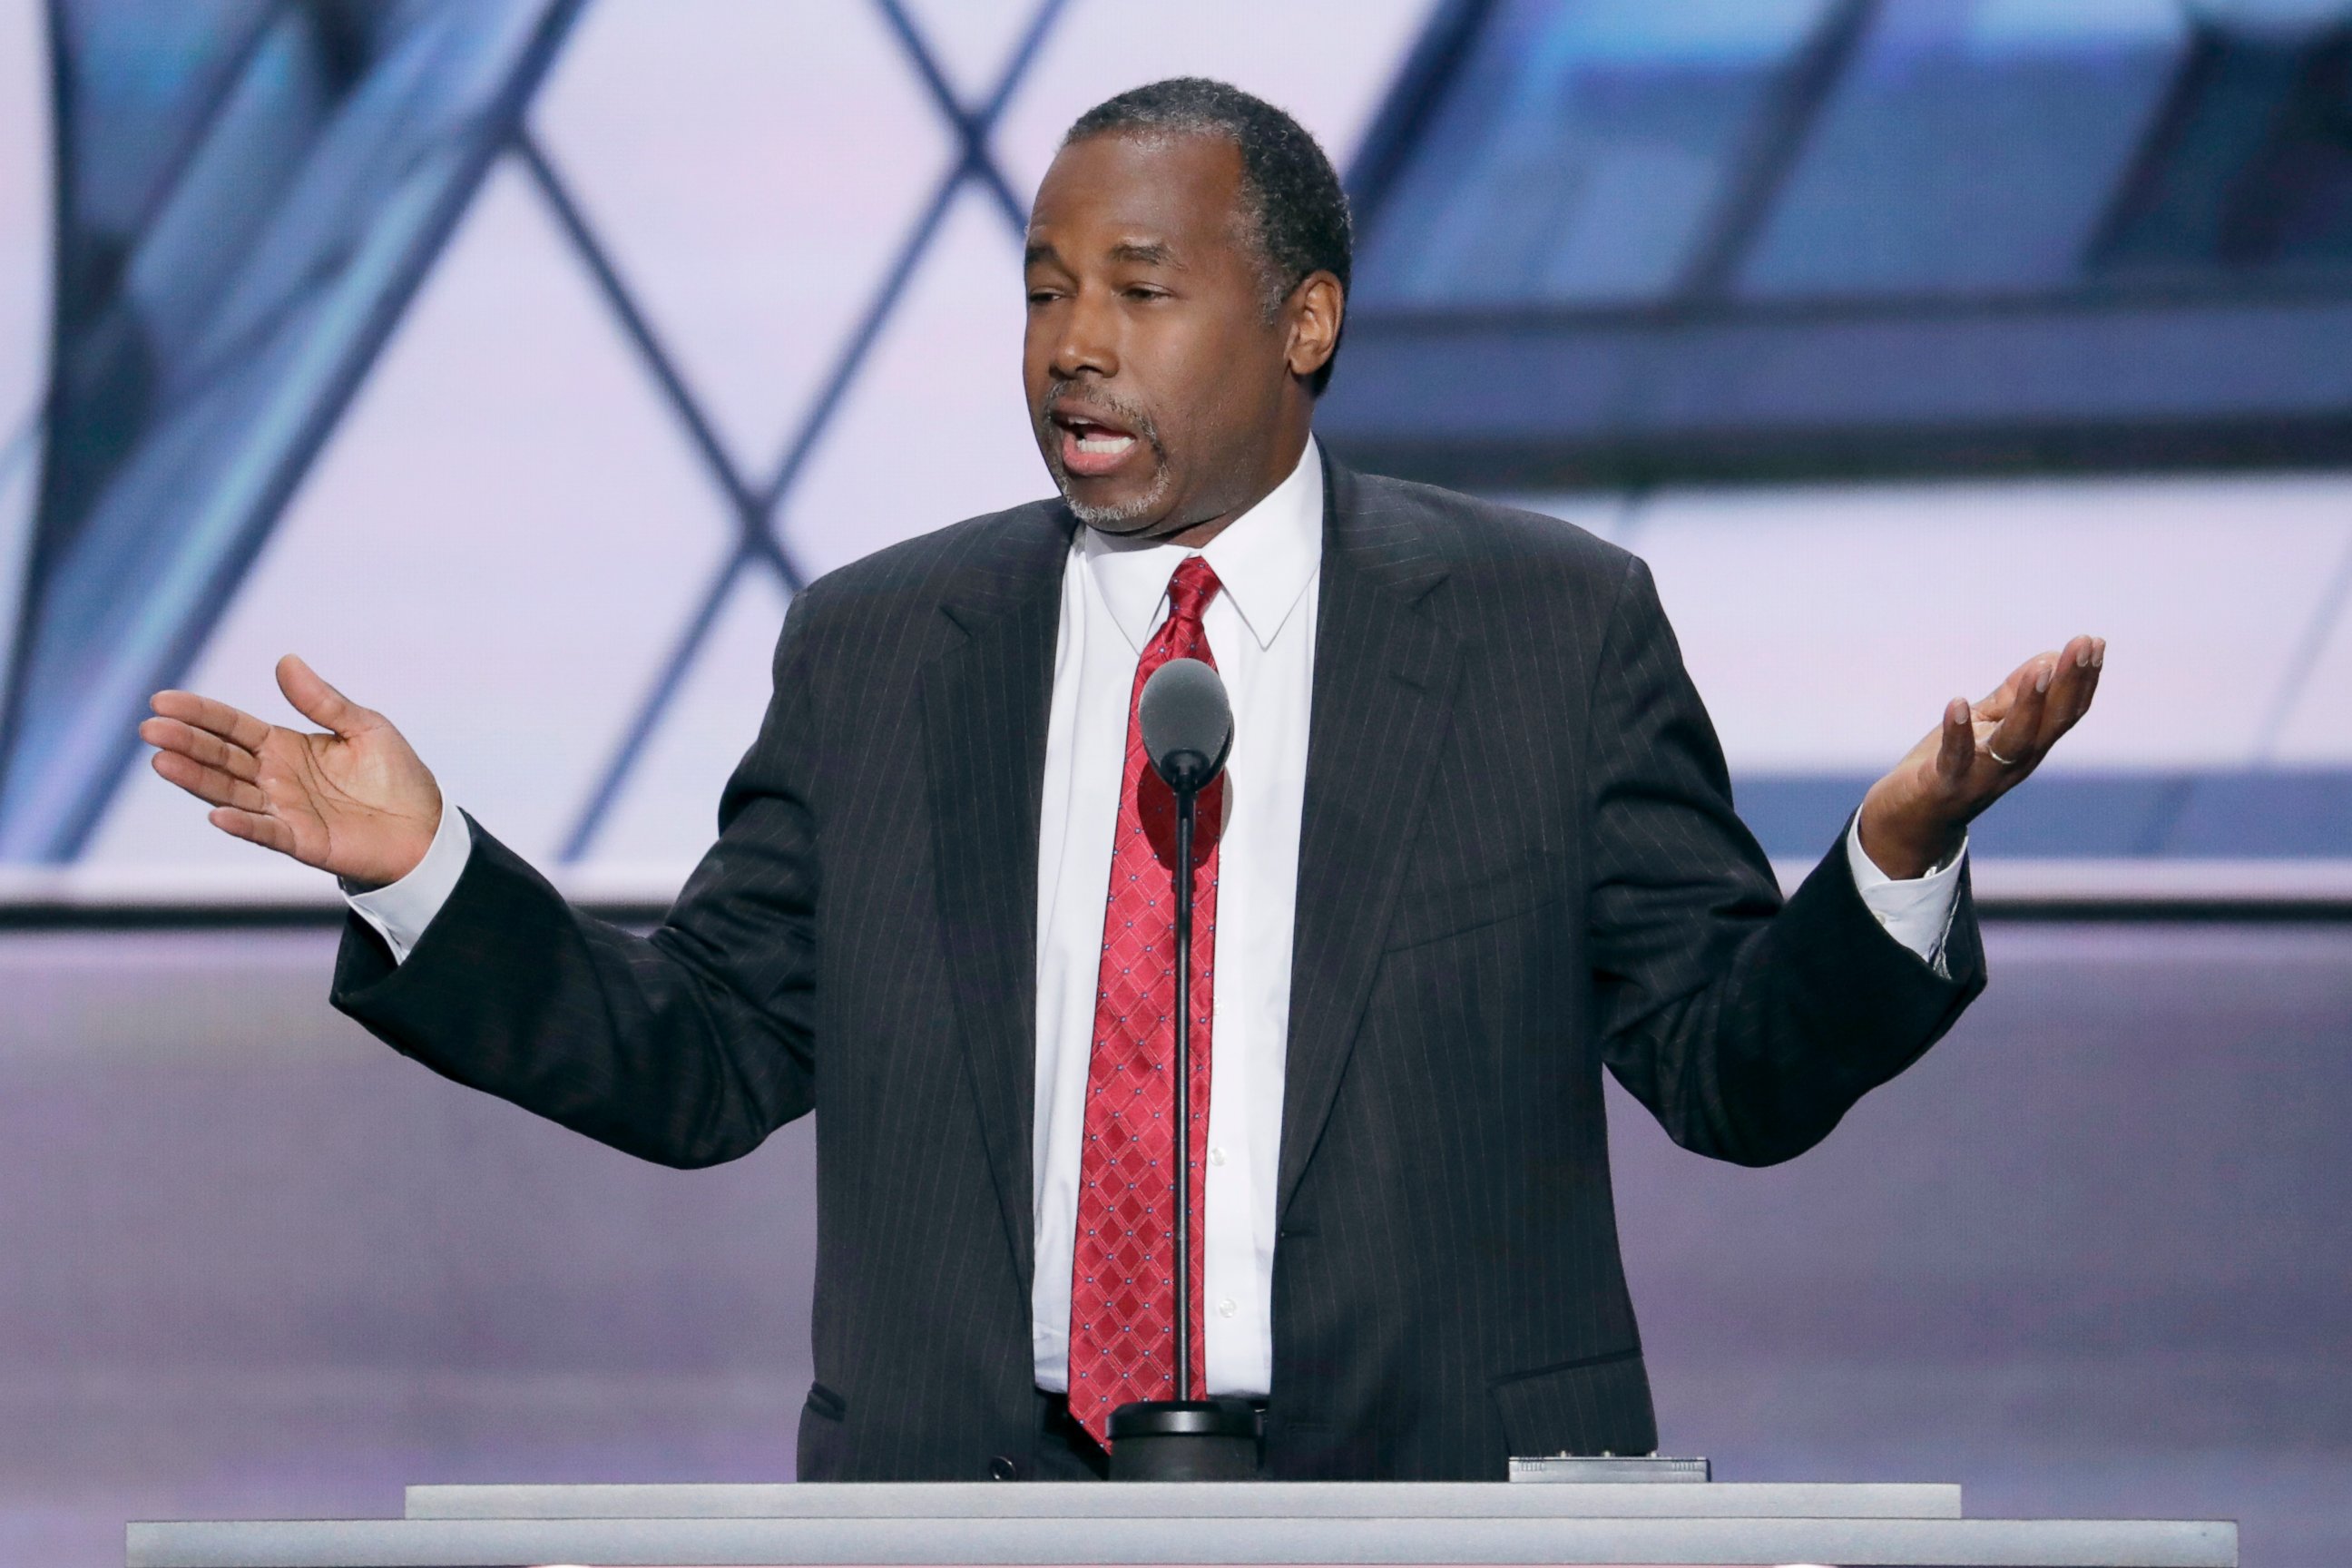 PHOTO: Dr. Ben Carson, former Republican Presidential Candidate, speaks during the second day of the Republican National Convention in Cleveland, July 19, 2016.